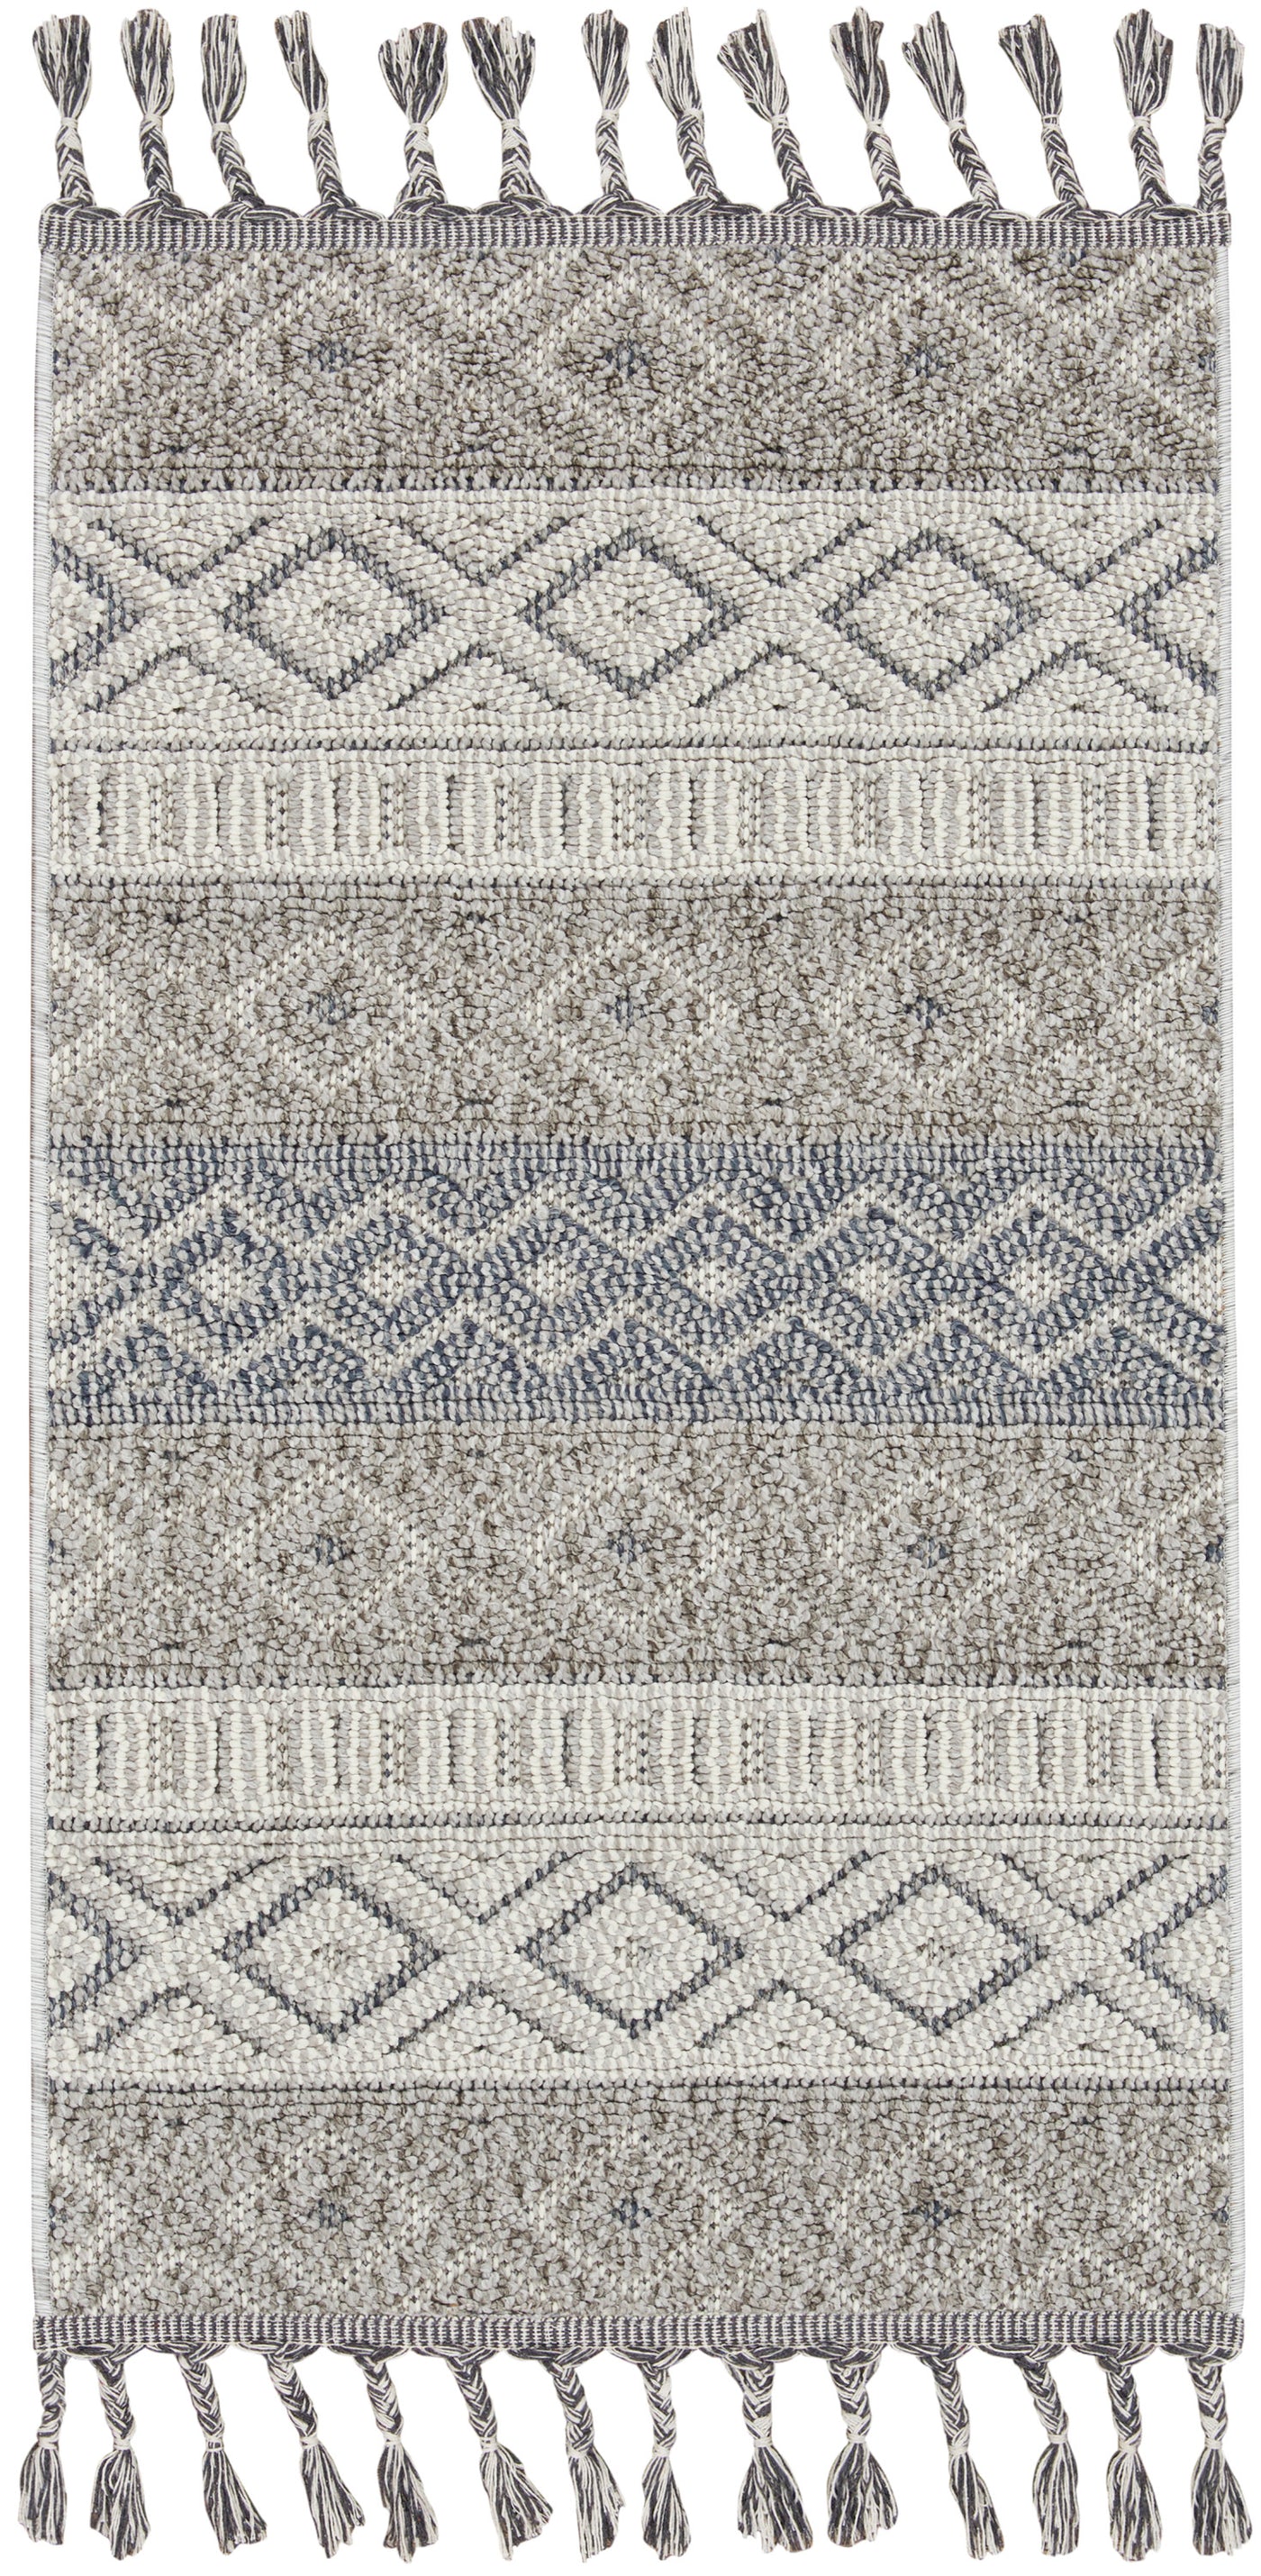 Buy Paxton pax03 ivory/slate Online at the Lowest Price | The Rug 